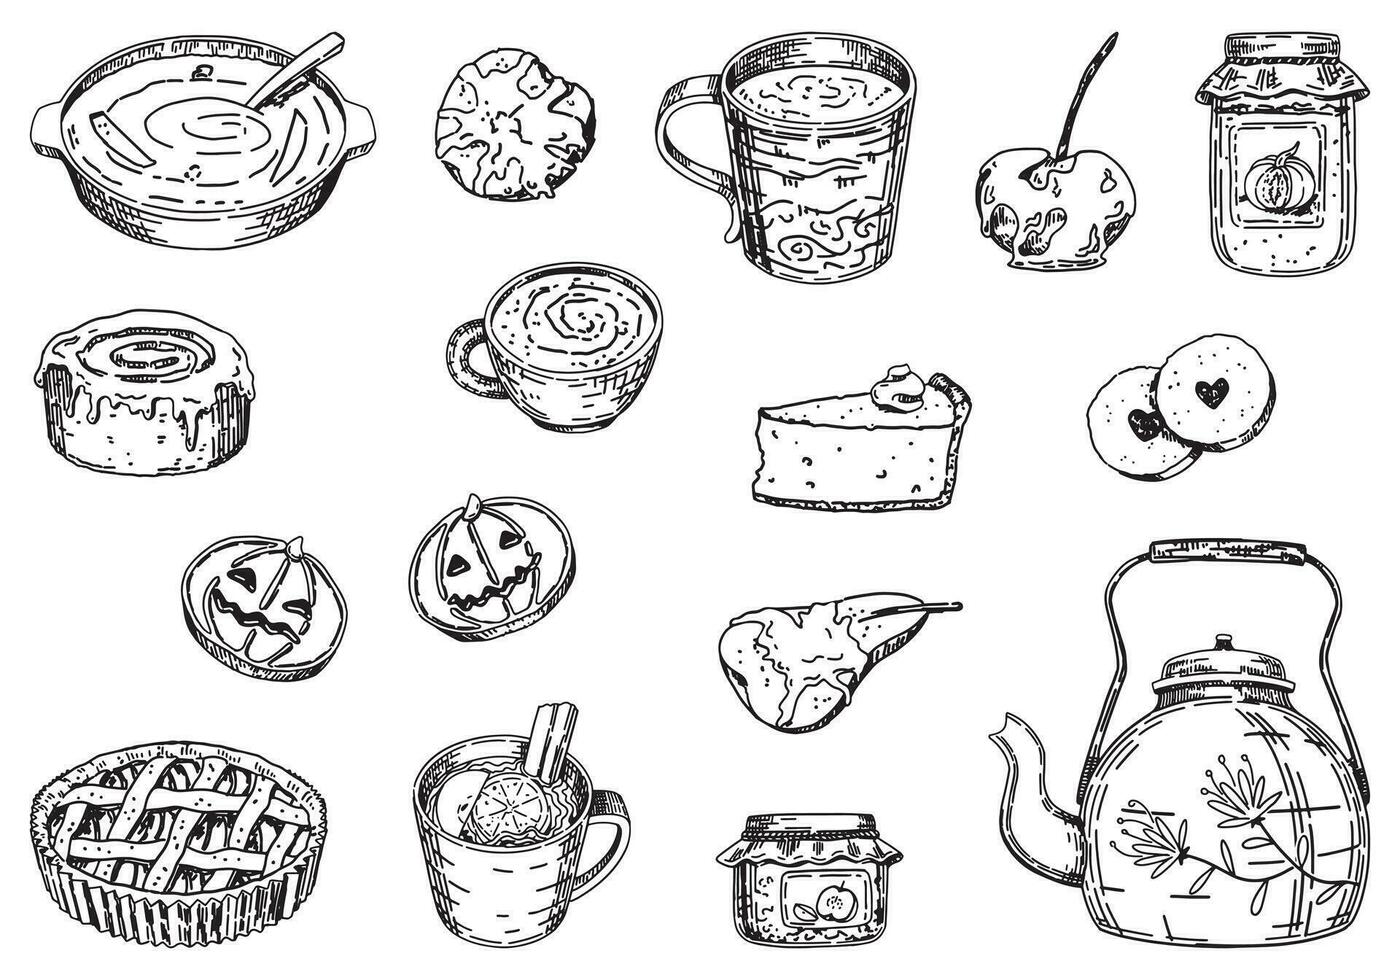 Outline clipart set of autumn food, drinks. Doodles of cozy beverages, homemade bakery, berry jam, cookies, baked apples and pears. Hand drawn vector illustrations collection isolated on white.